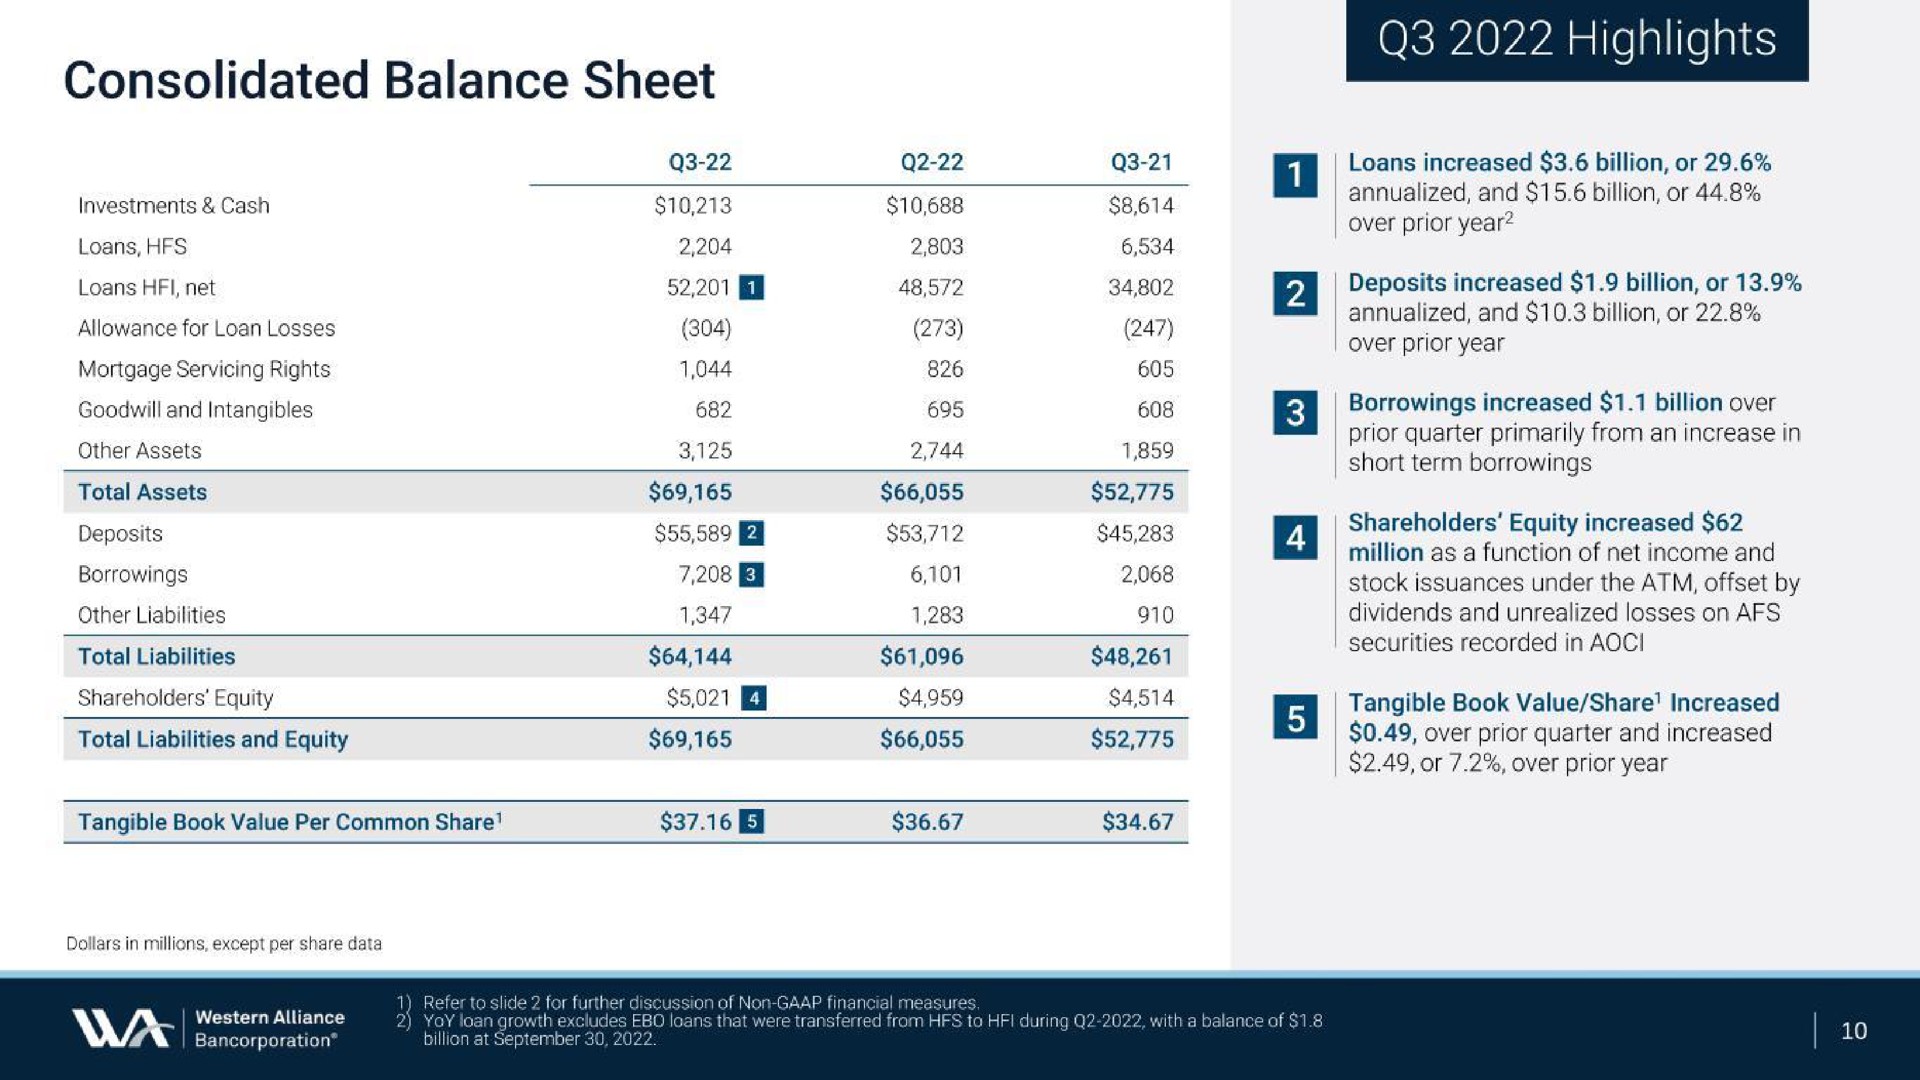 consolidated balance sheet highlights deposits aes | Western Alliance Bancorporation